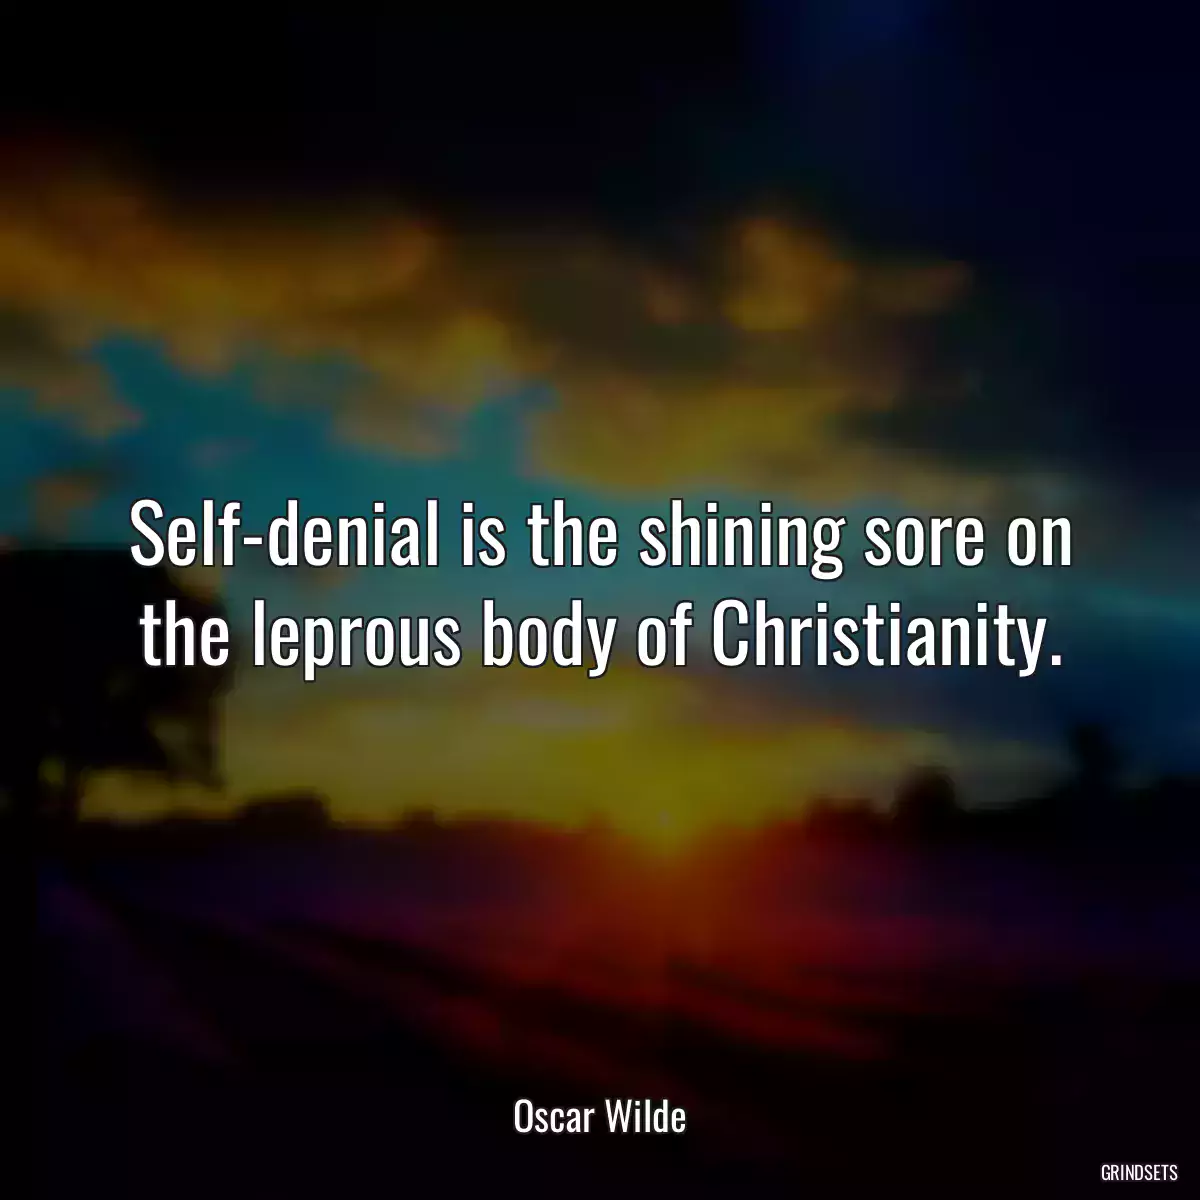 Self-denial is the shining sore on the leprous body of Christianity.